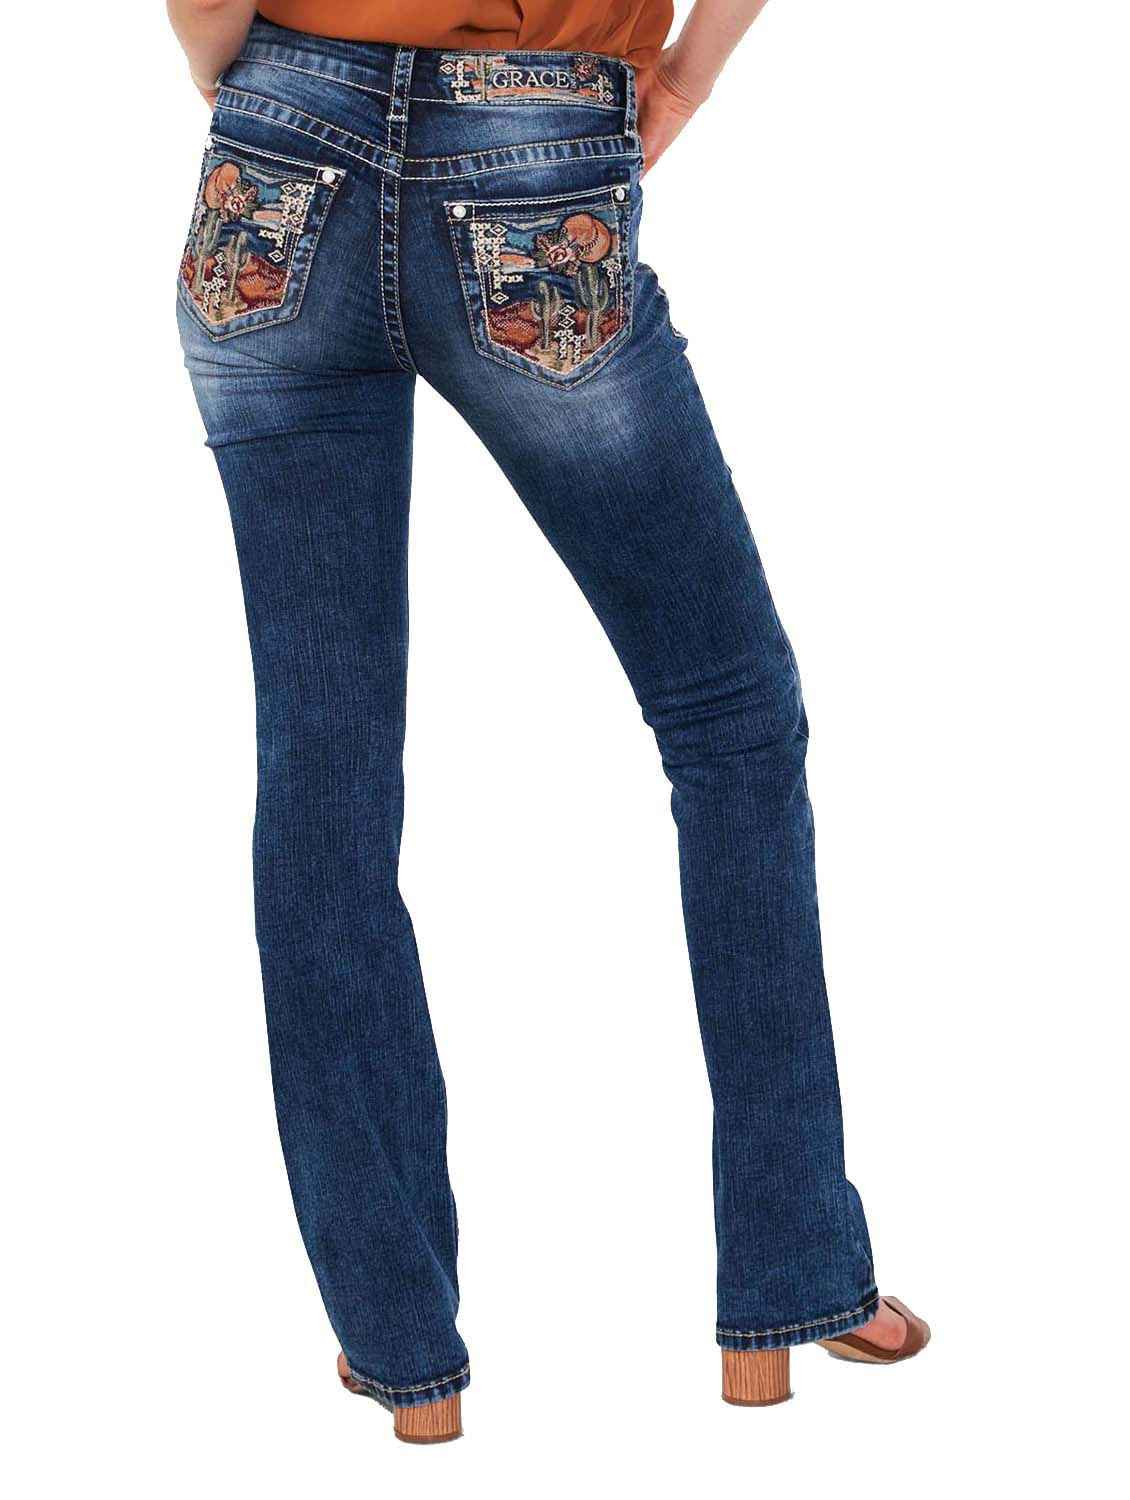 Grace in LA Cactus Scene Embroidered Mid Rise Bootcut Jeans - Jeffers